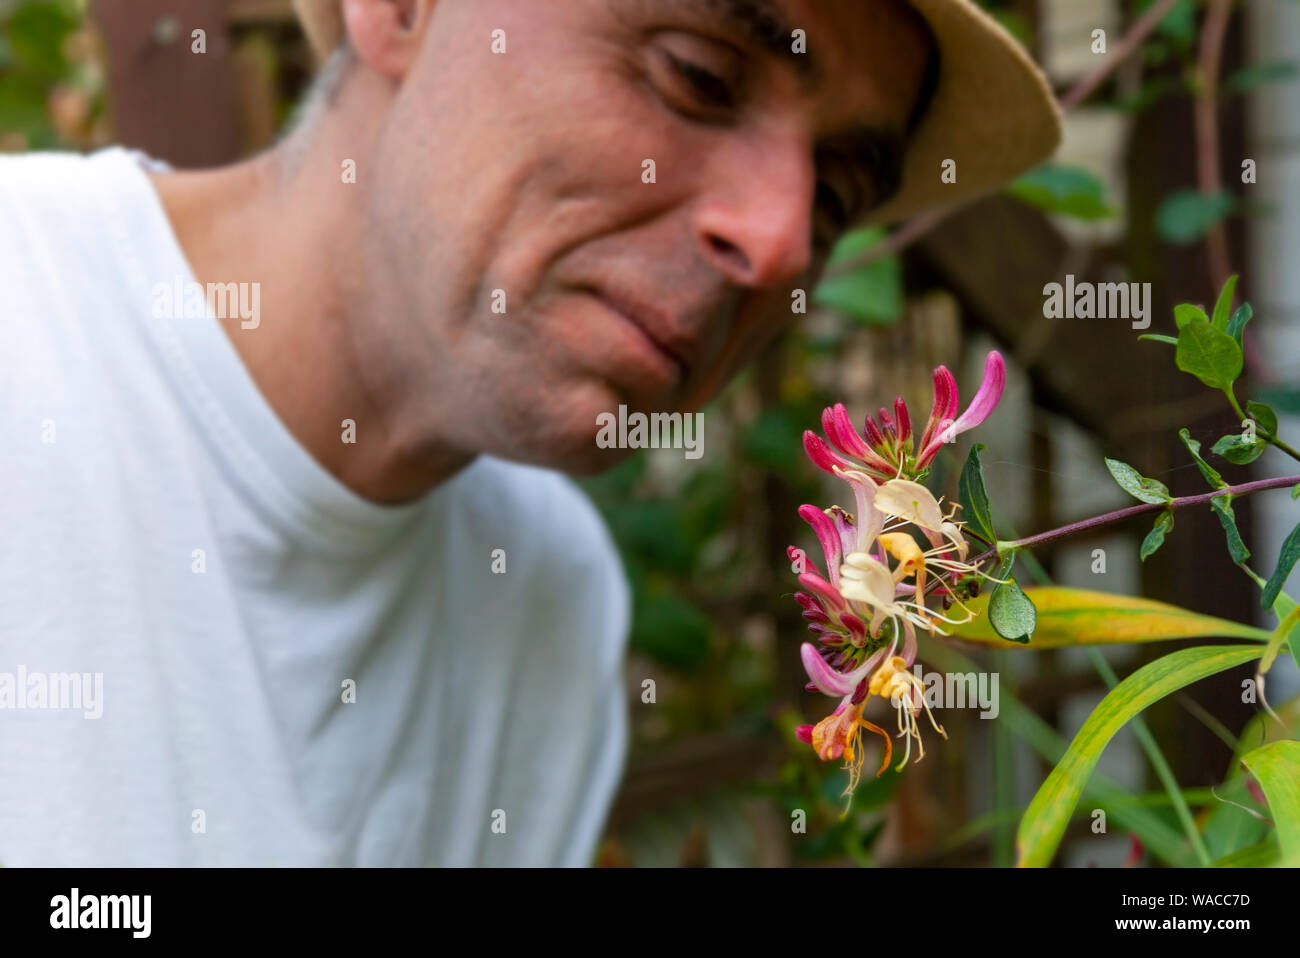 A clean-shaven, mature, male gardener in white t-shirt leans forward, testing the scent of a section of flowering Honeysuckle (Lonicera) arching vine. Stock Photo